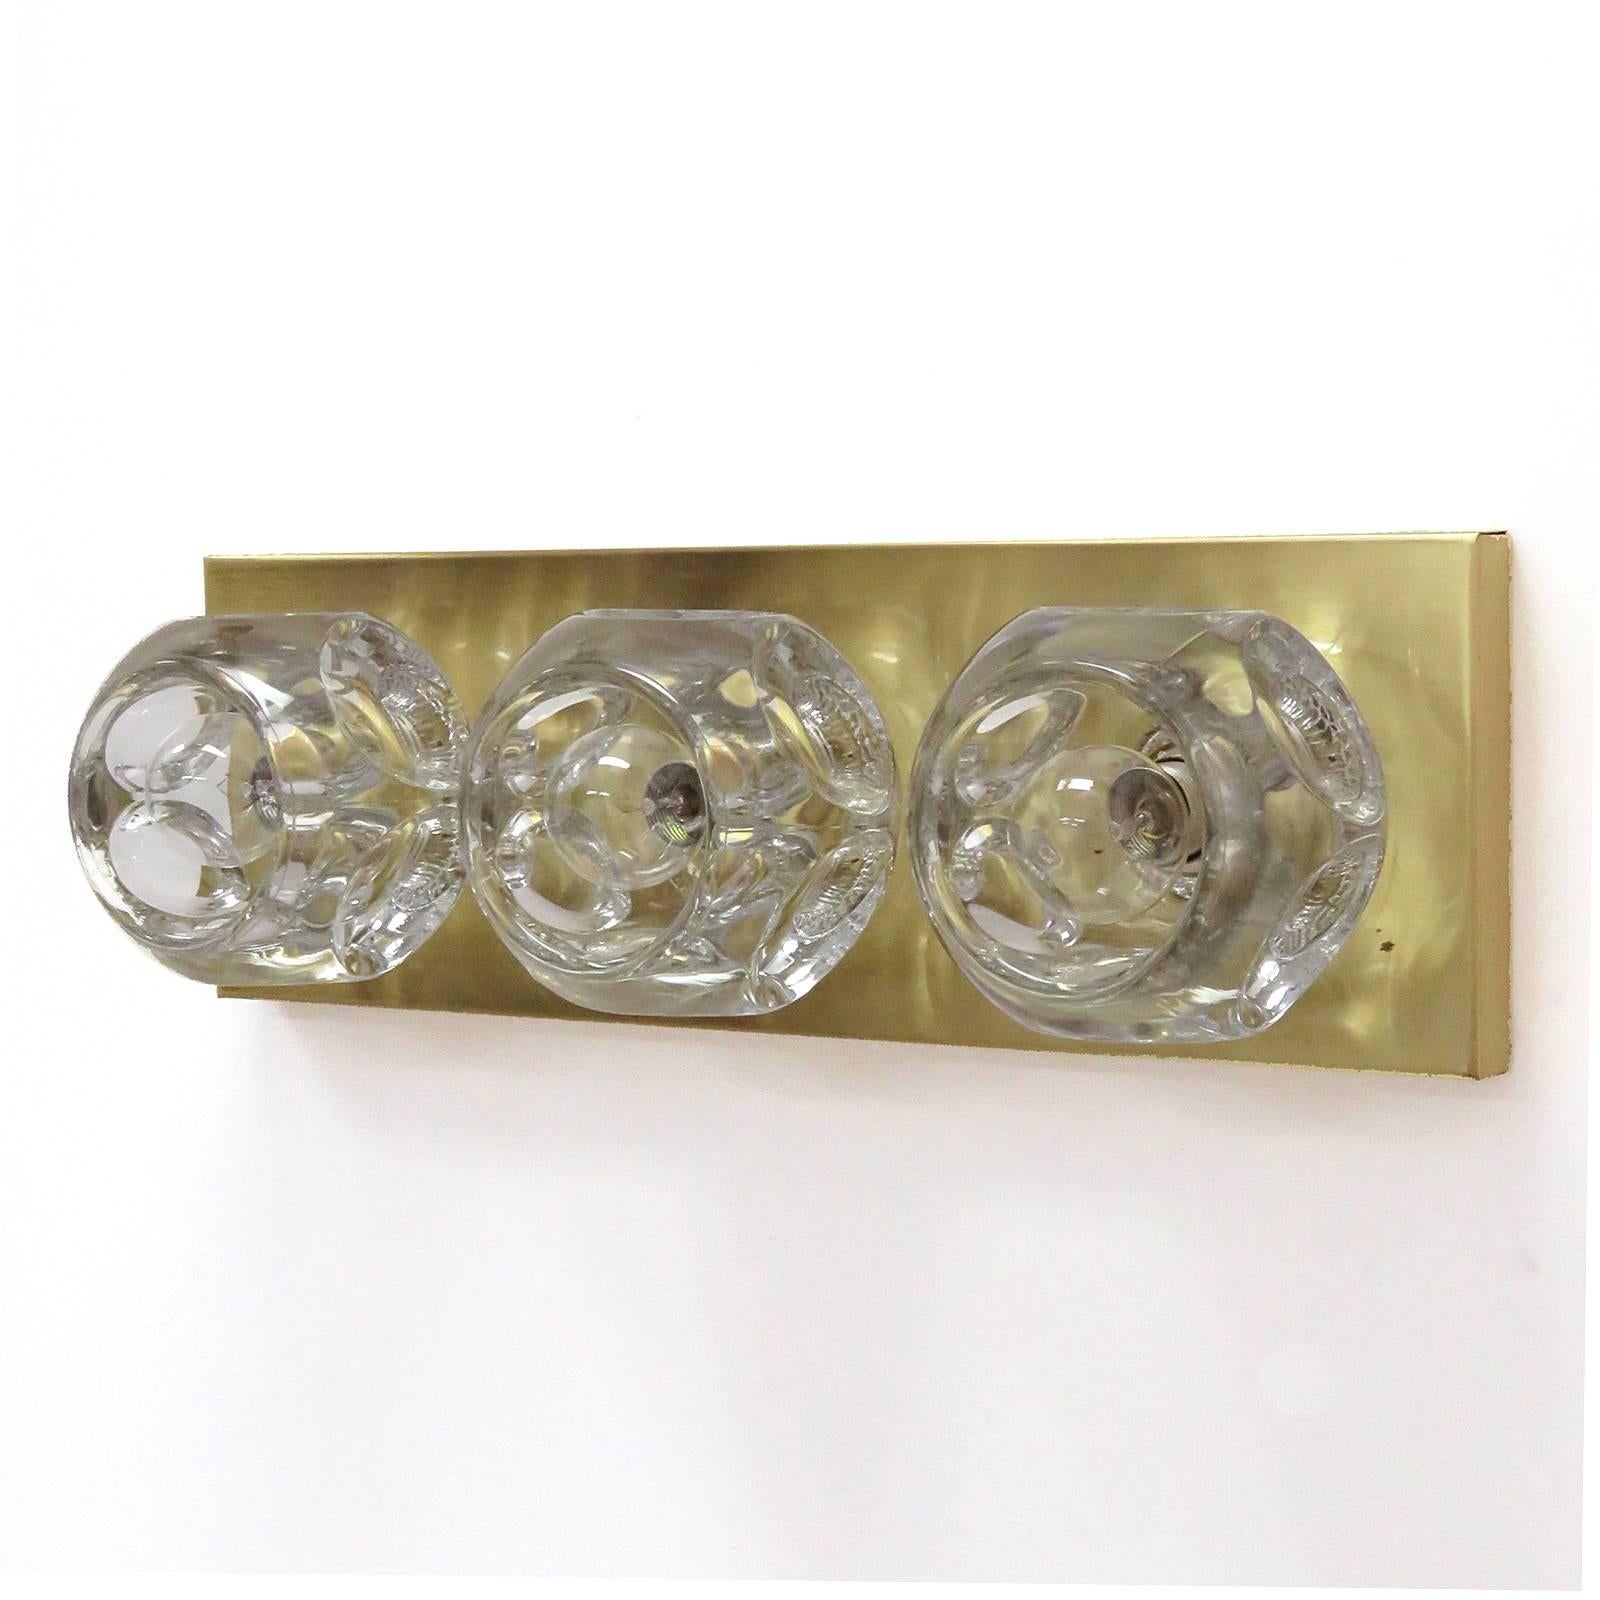 Stunning pair of cubic wall light by Peill & Putzler, Germany, each sconce has three large faceted, solid glass spheres with artful bubble inclusions, mounted to a brass plate, can be mounted horizontally or vertically, optional use as a ceiling